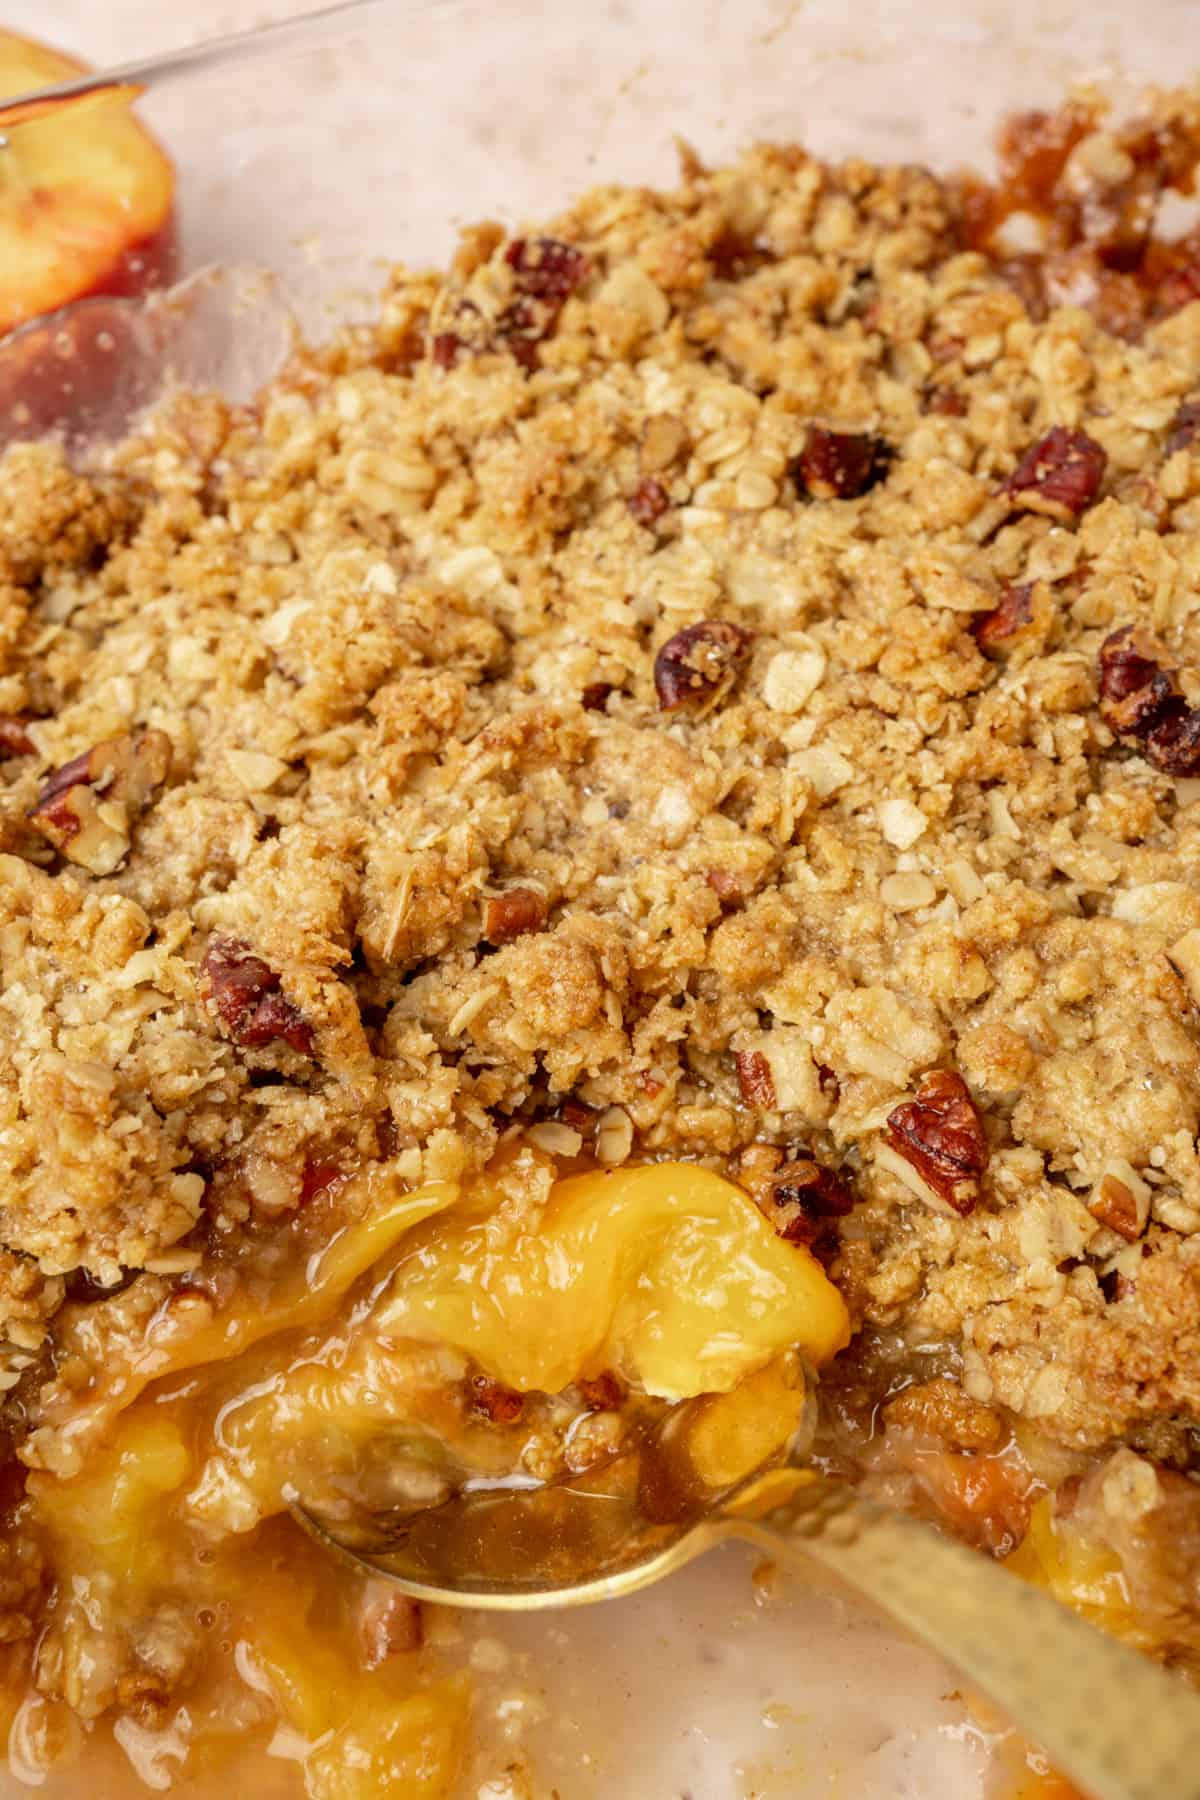 A spoon digs into the juicy filling of a peach crisp.